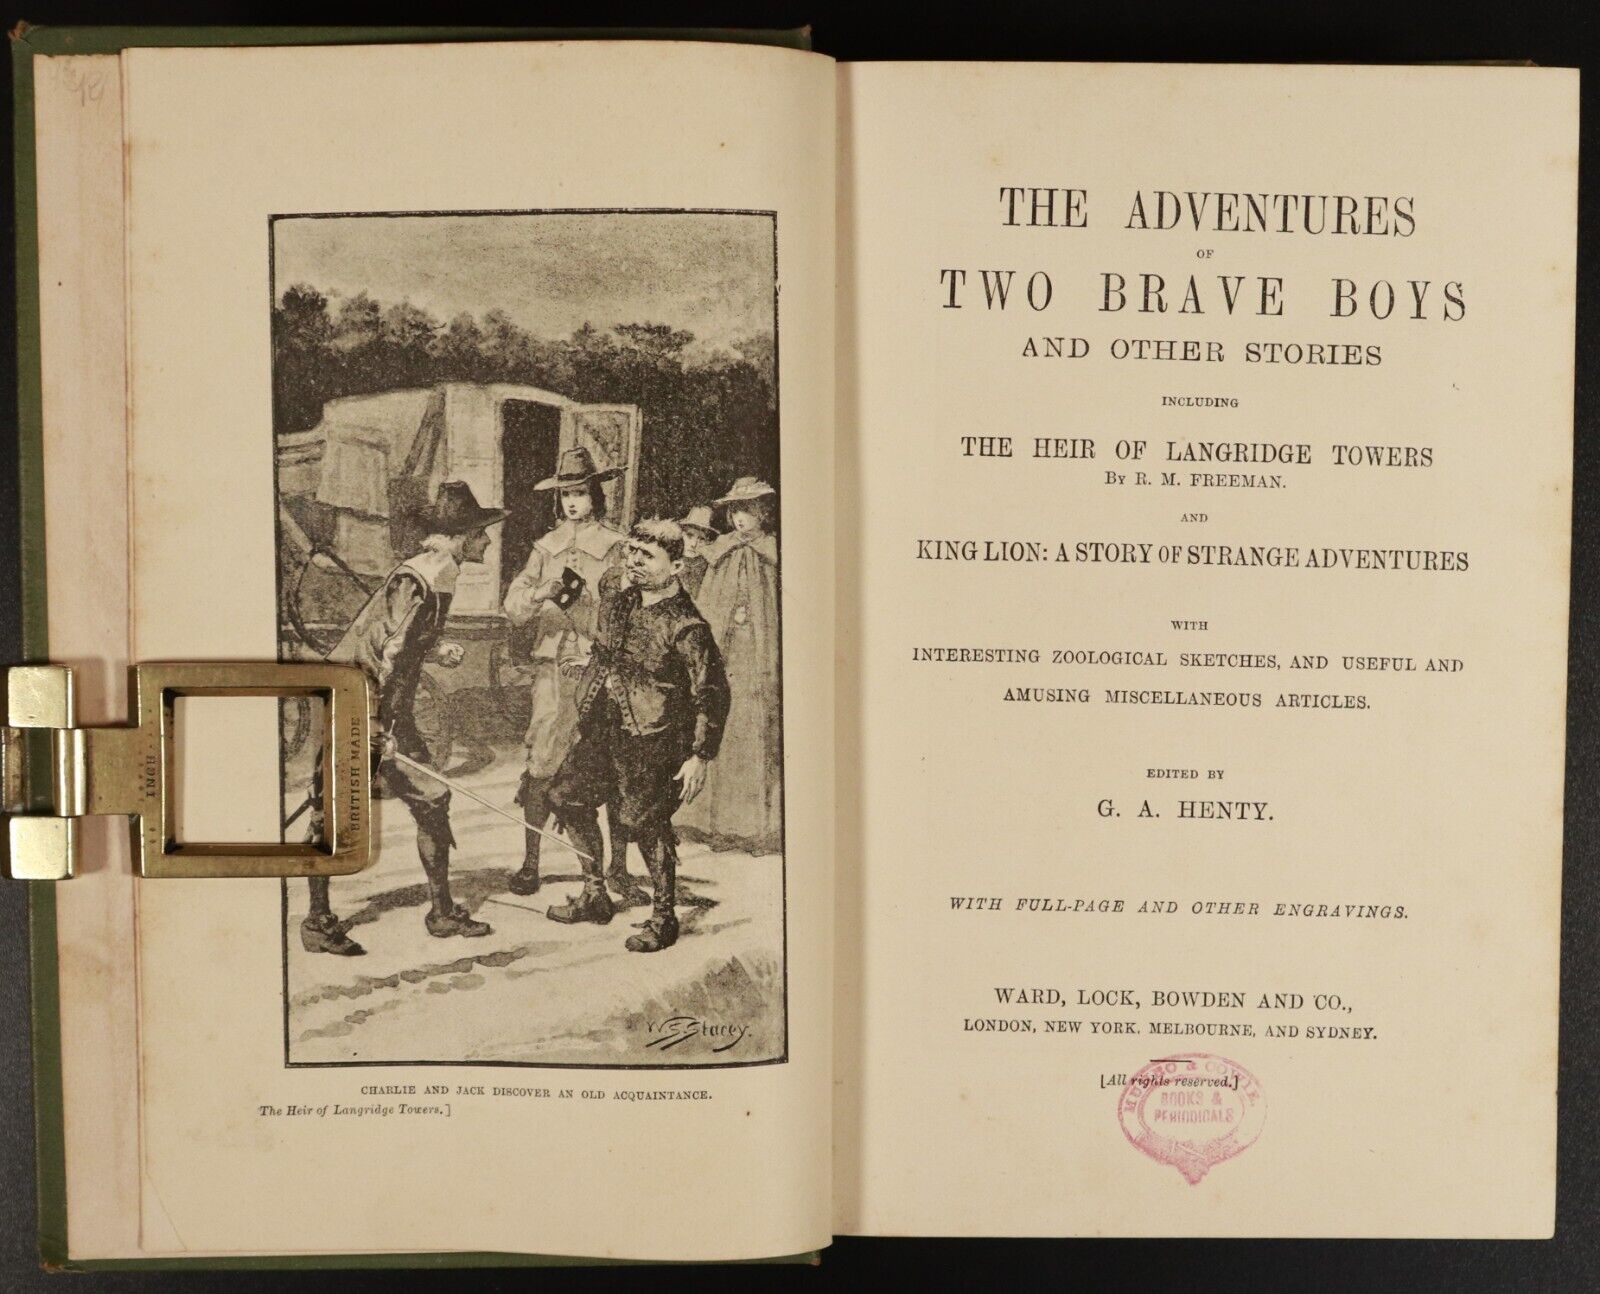 c1890 Adventures Of Two Brave Boys by G.A. Henty Antique Children's Book - 0